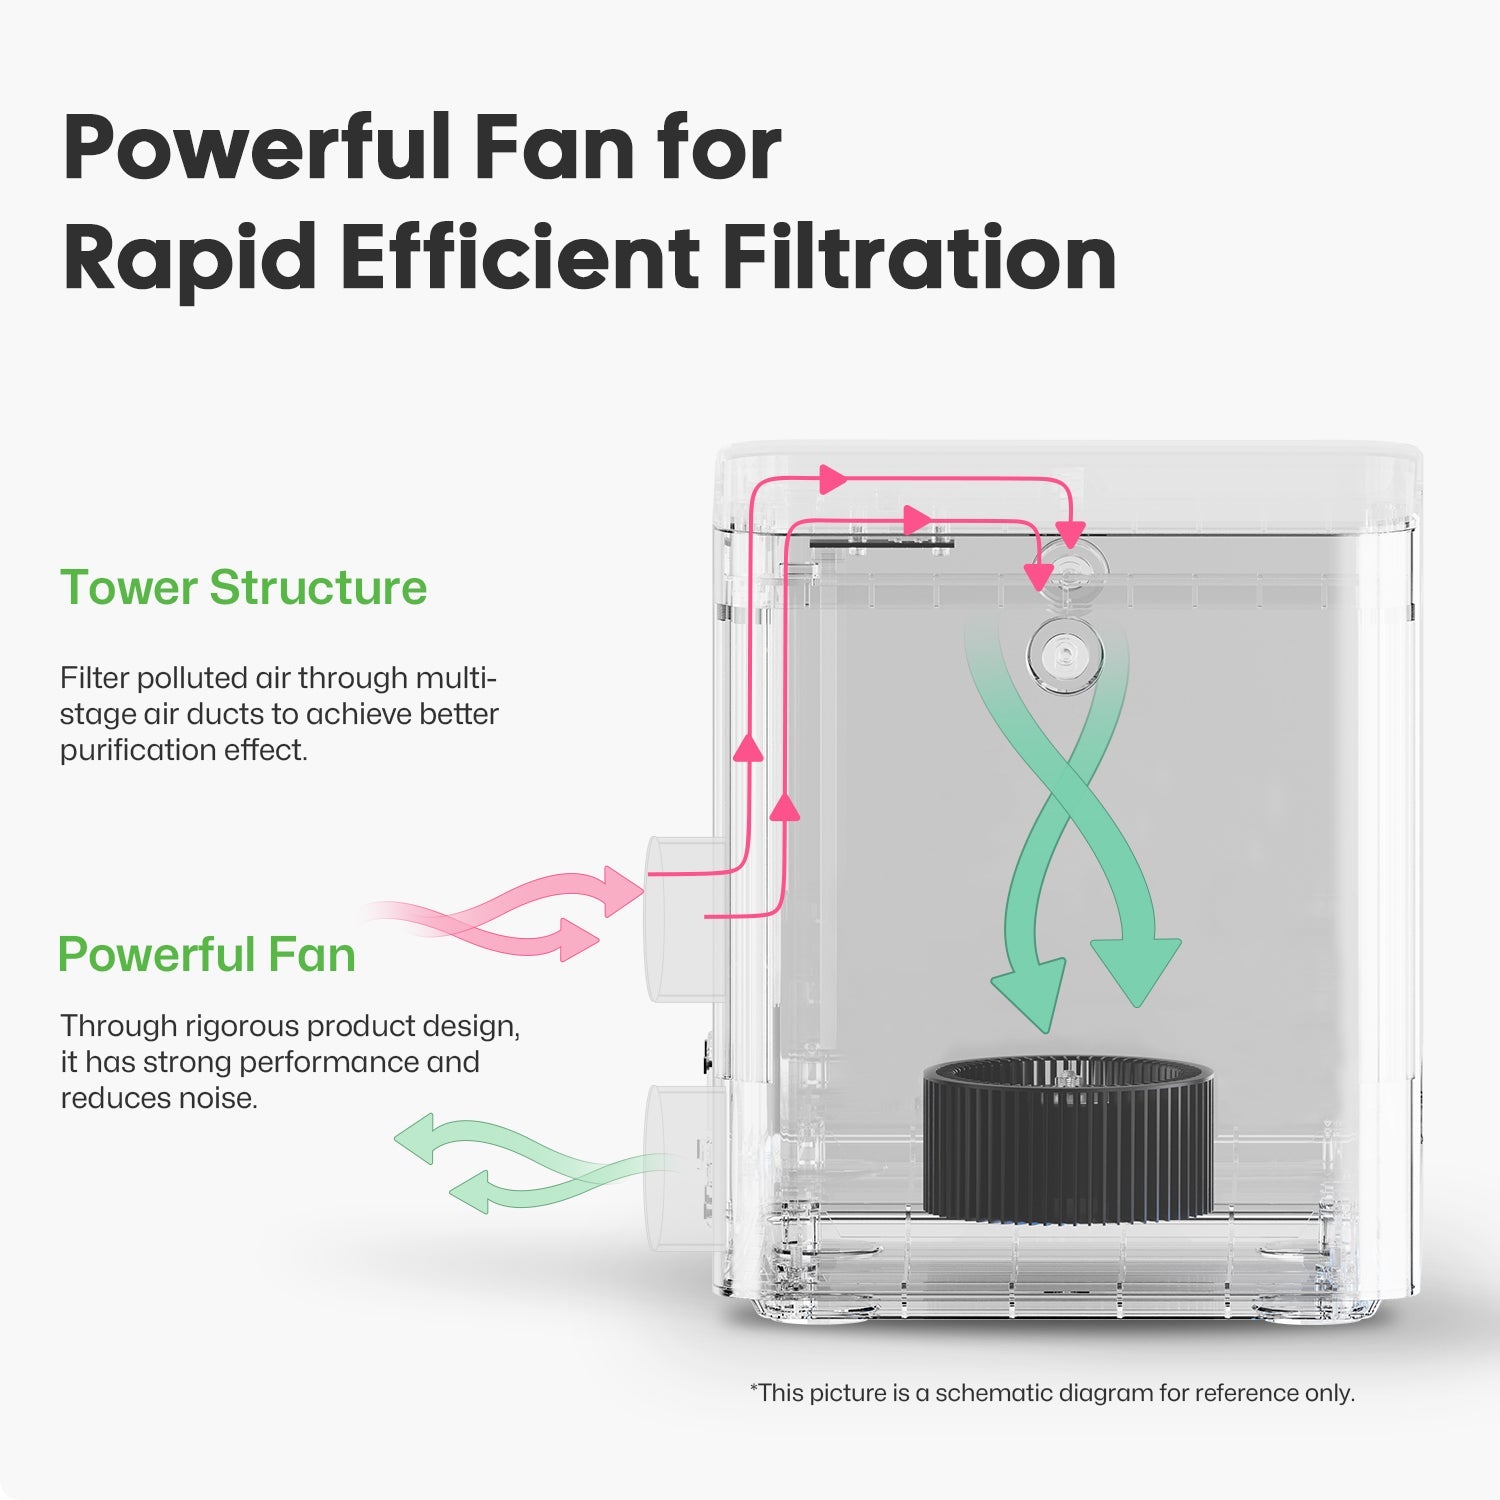 Tower structure and powerful fan